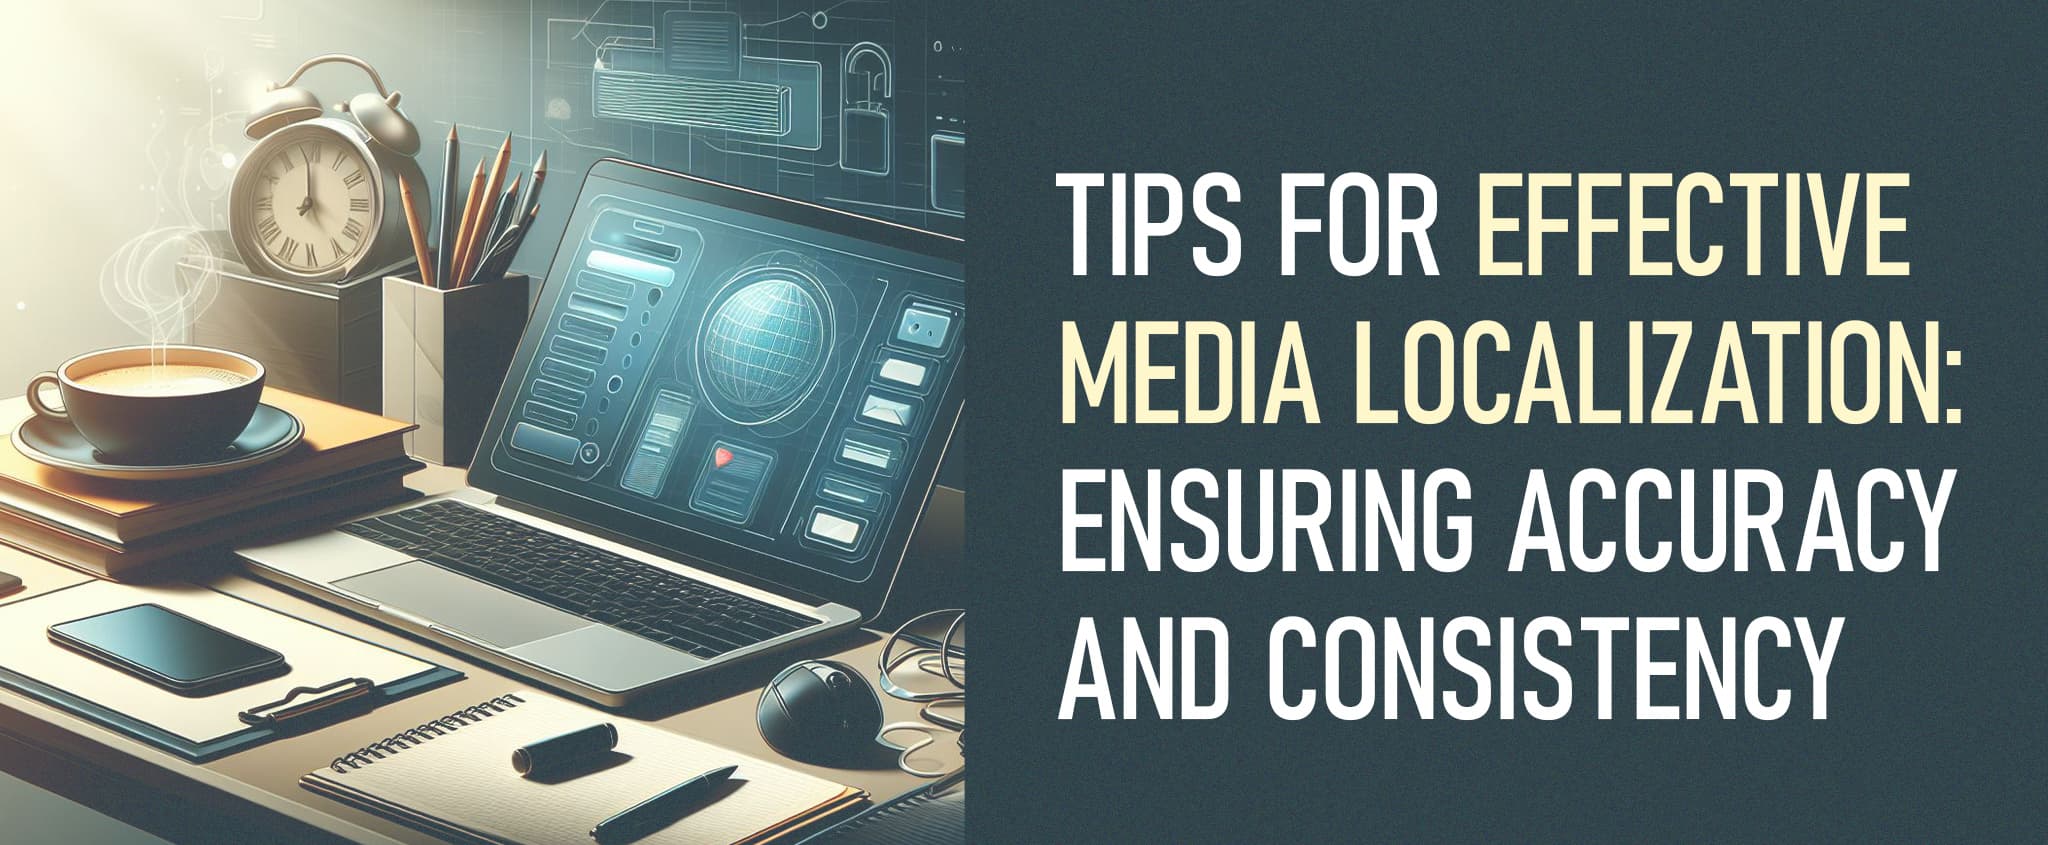 Tips for Effective Media Localization: Ensuring Accuracy and Consistency